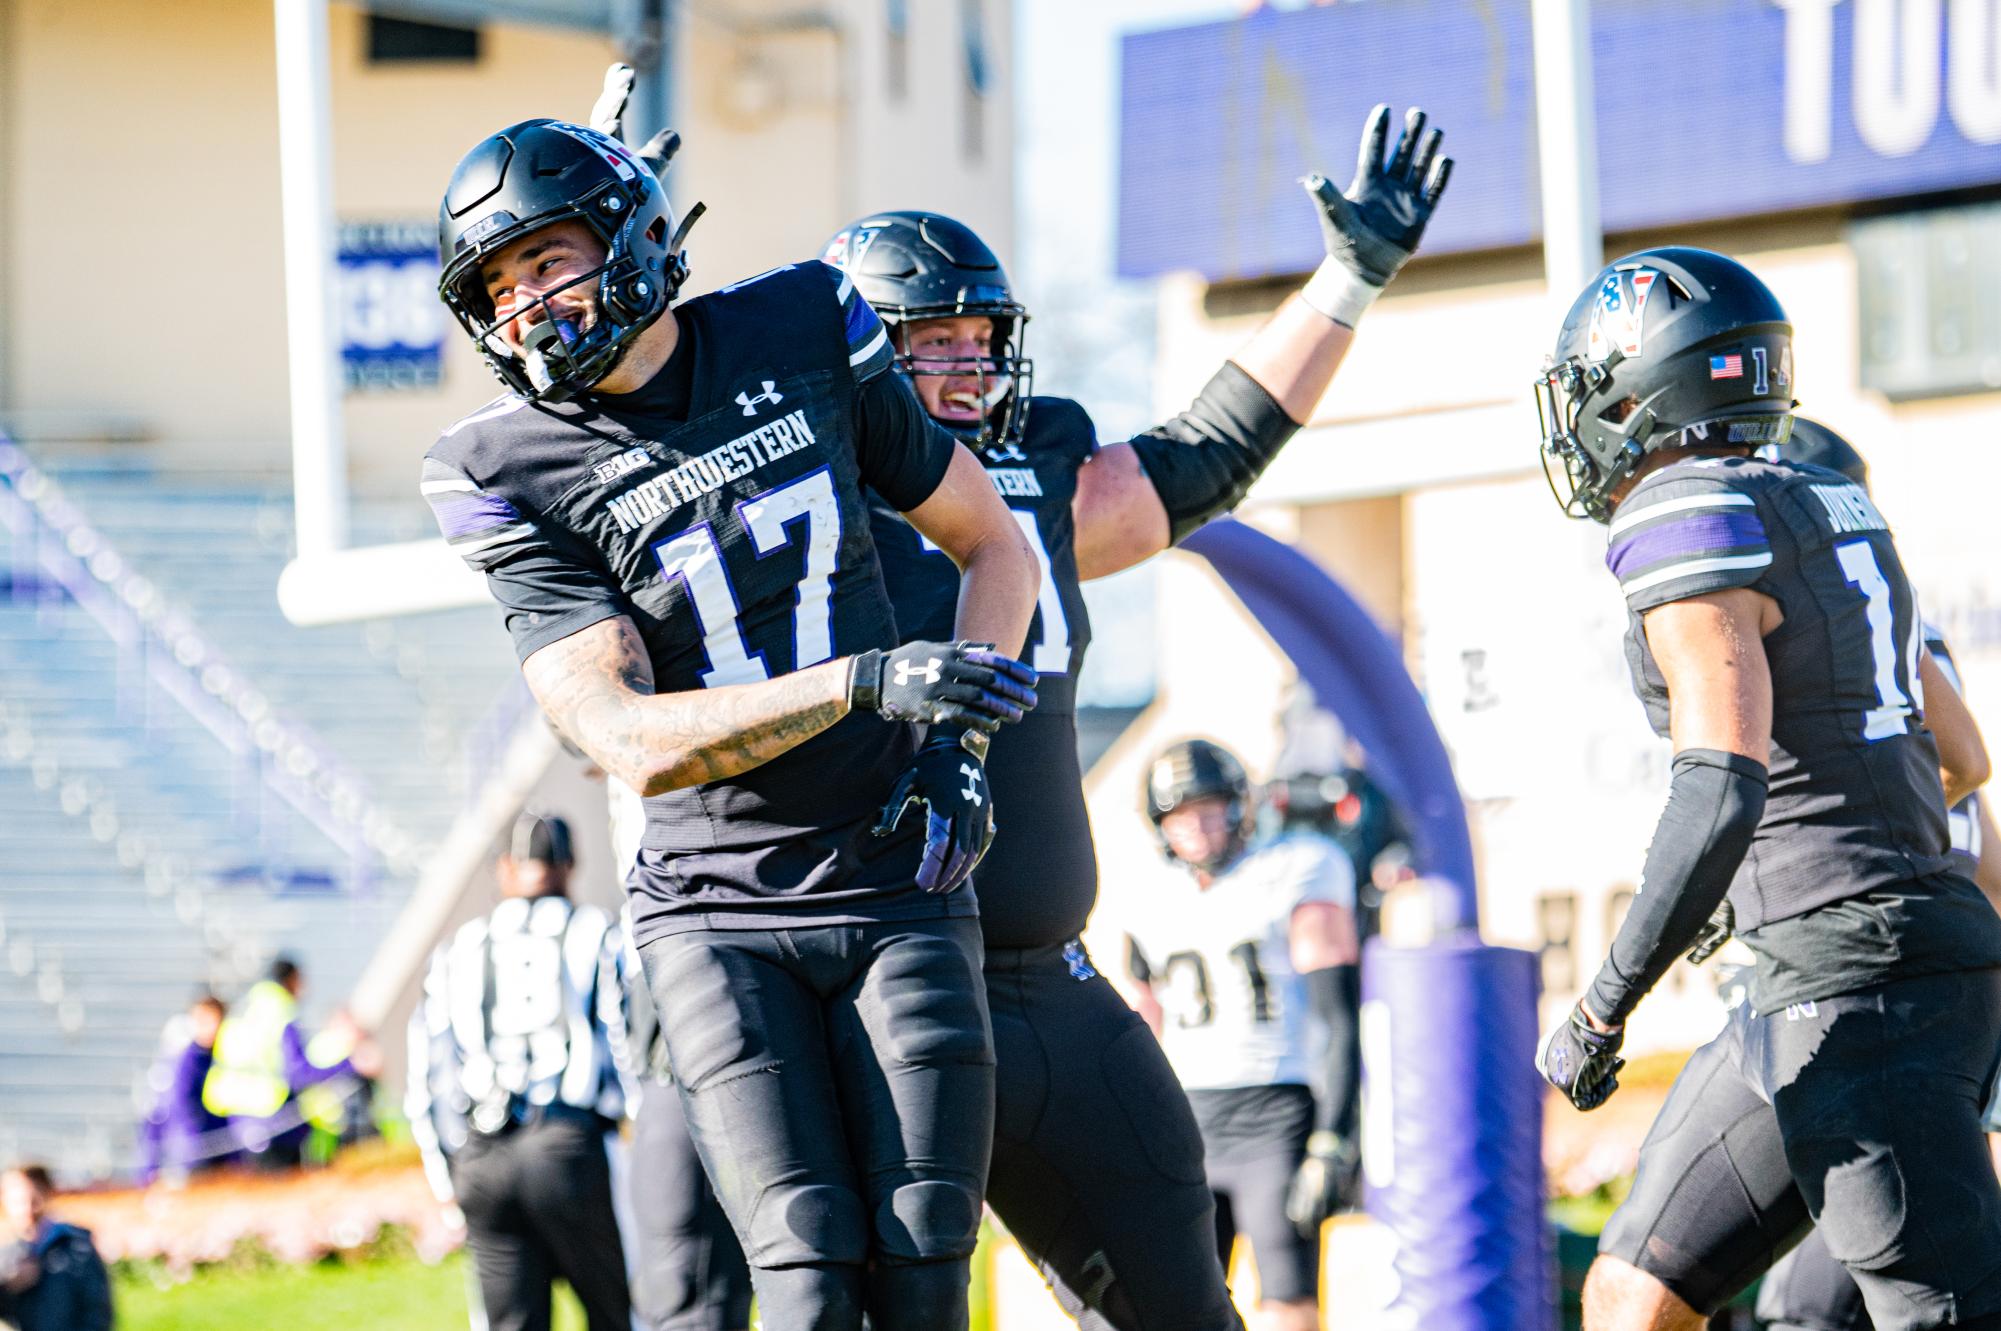 Senior offensive lineman Ben Wrather, and wide receivers senior Bryce Kirtz and sixth-year Cam Johnson celebrate against Purdue. The ‘Cats will be taking their talents out west on December 23rd to face Utah in the Las Vegas Bowl.